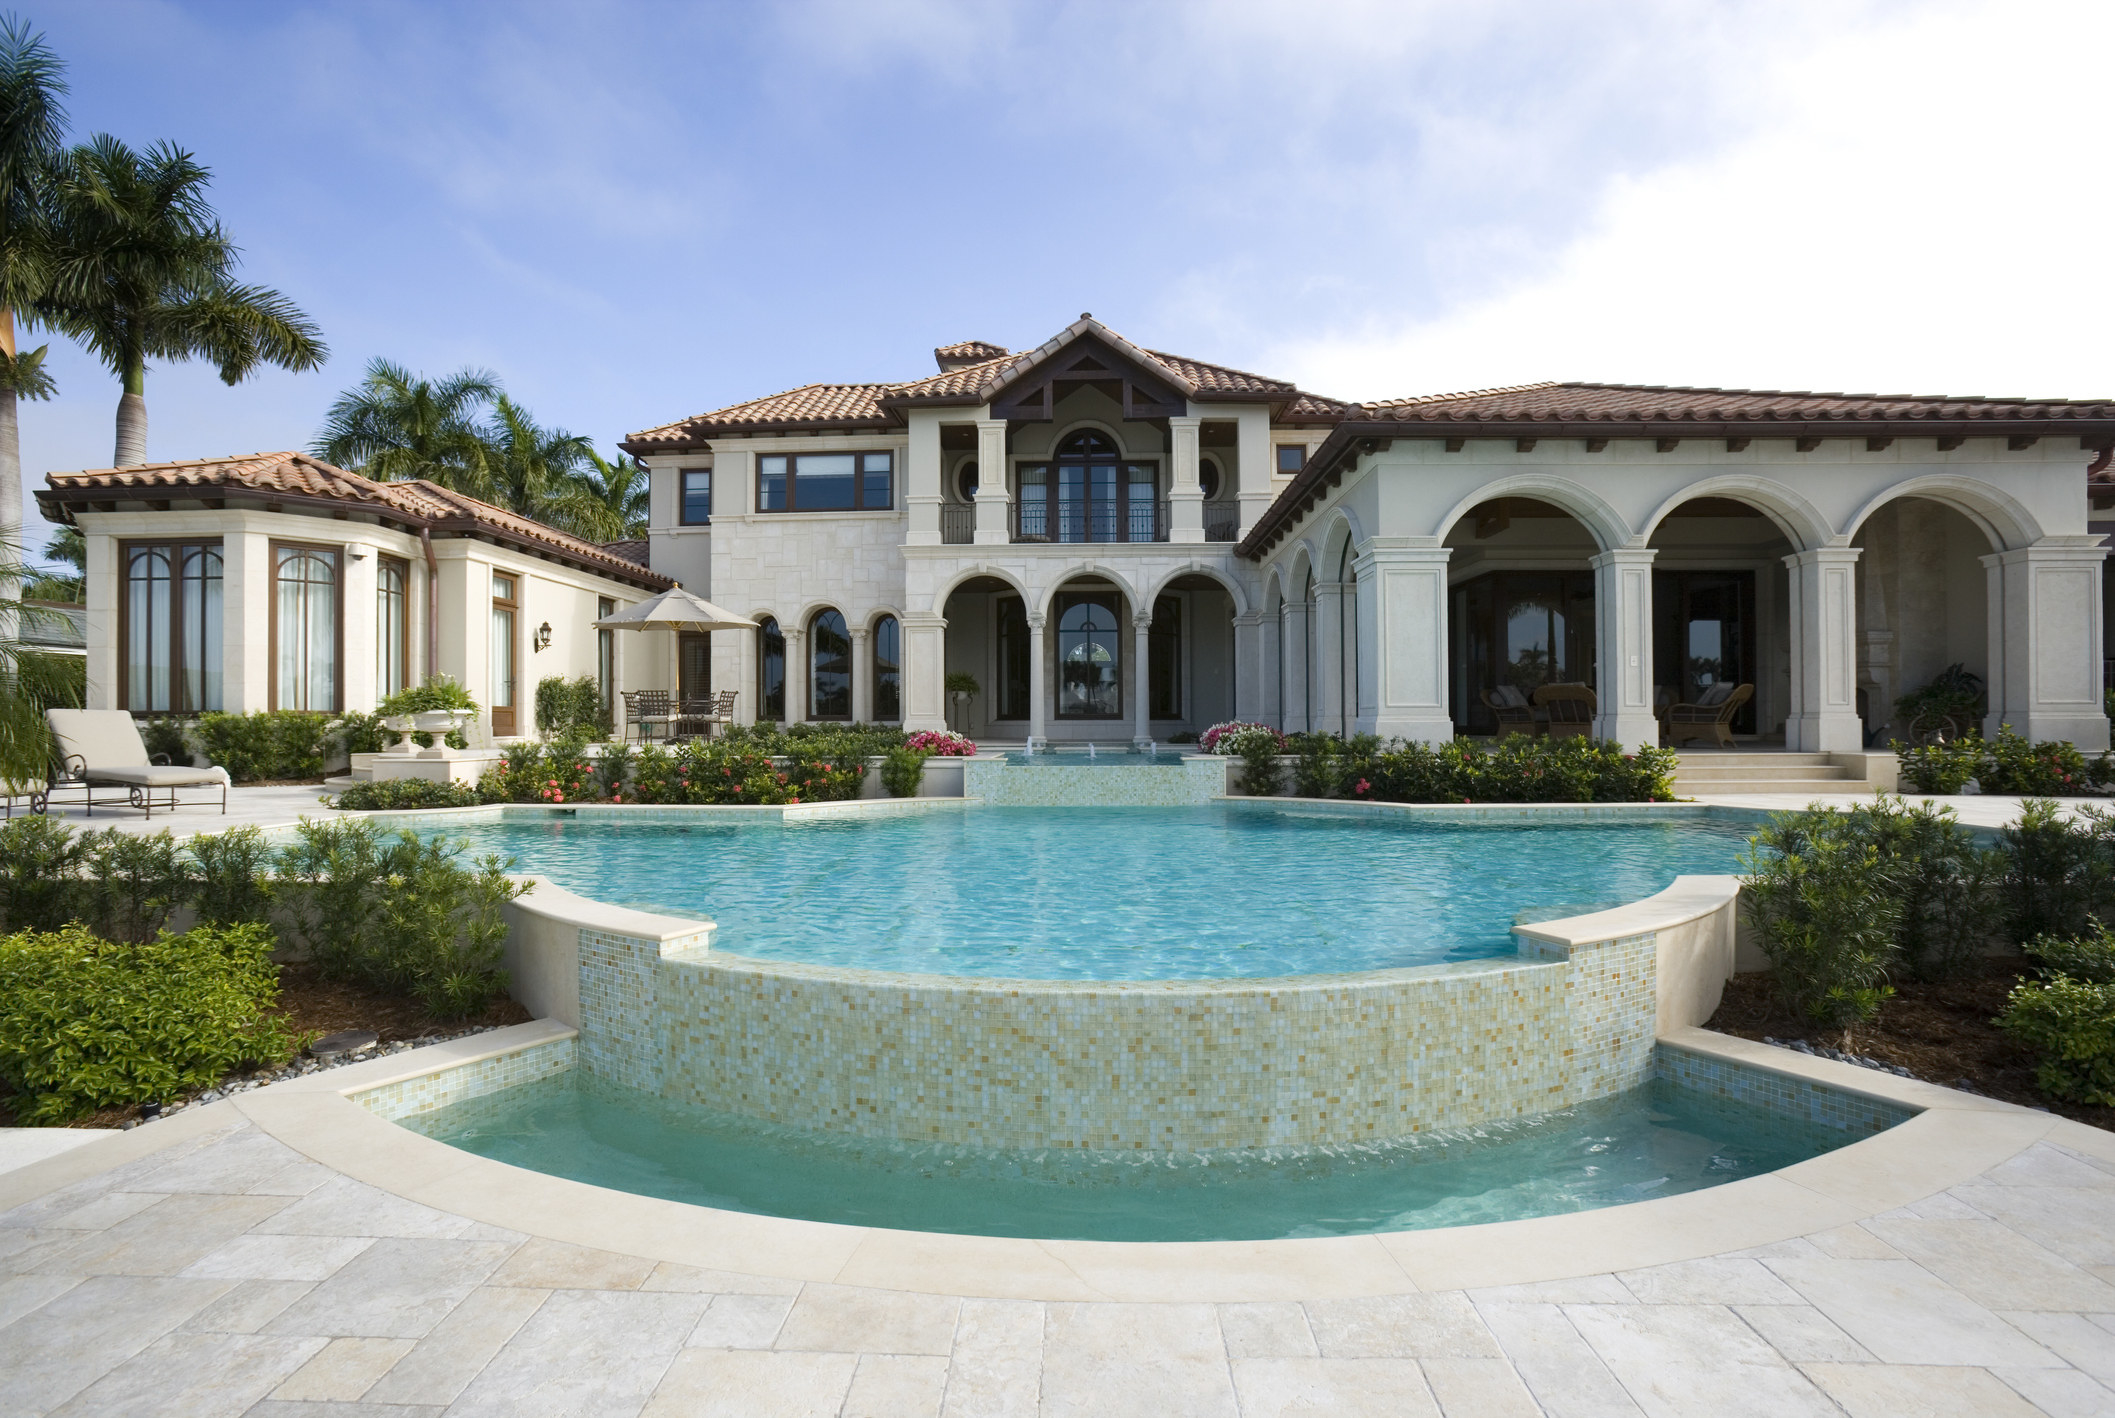 A mansion with a pool